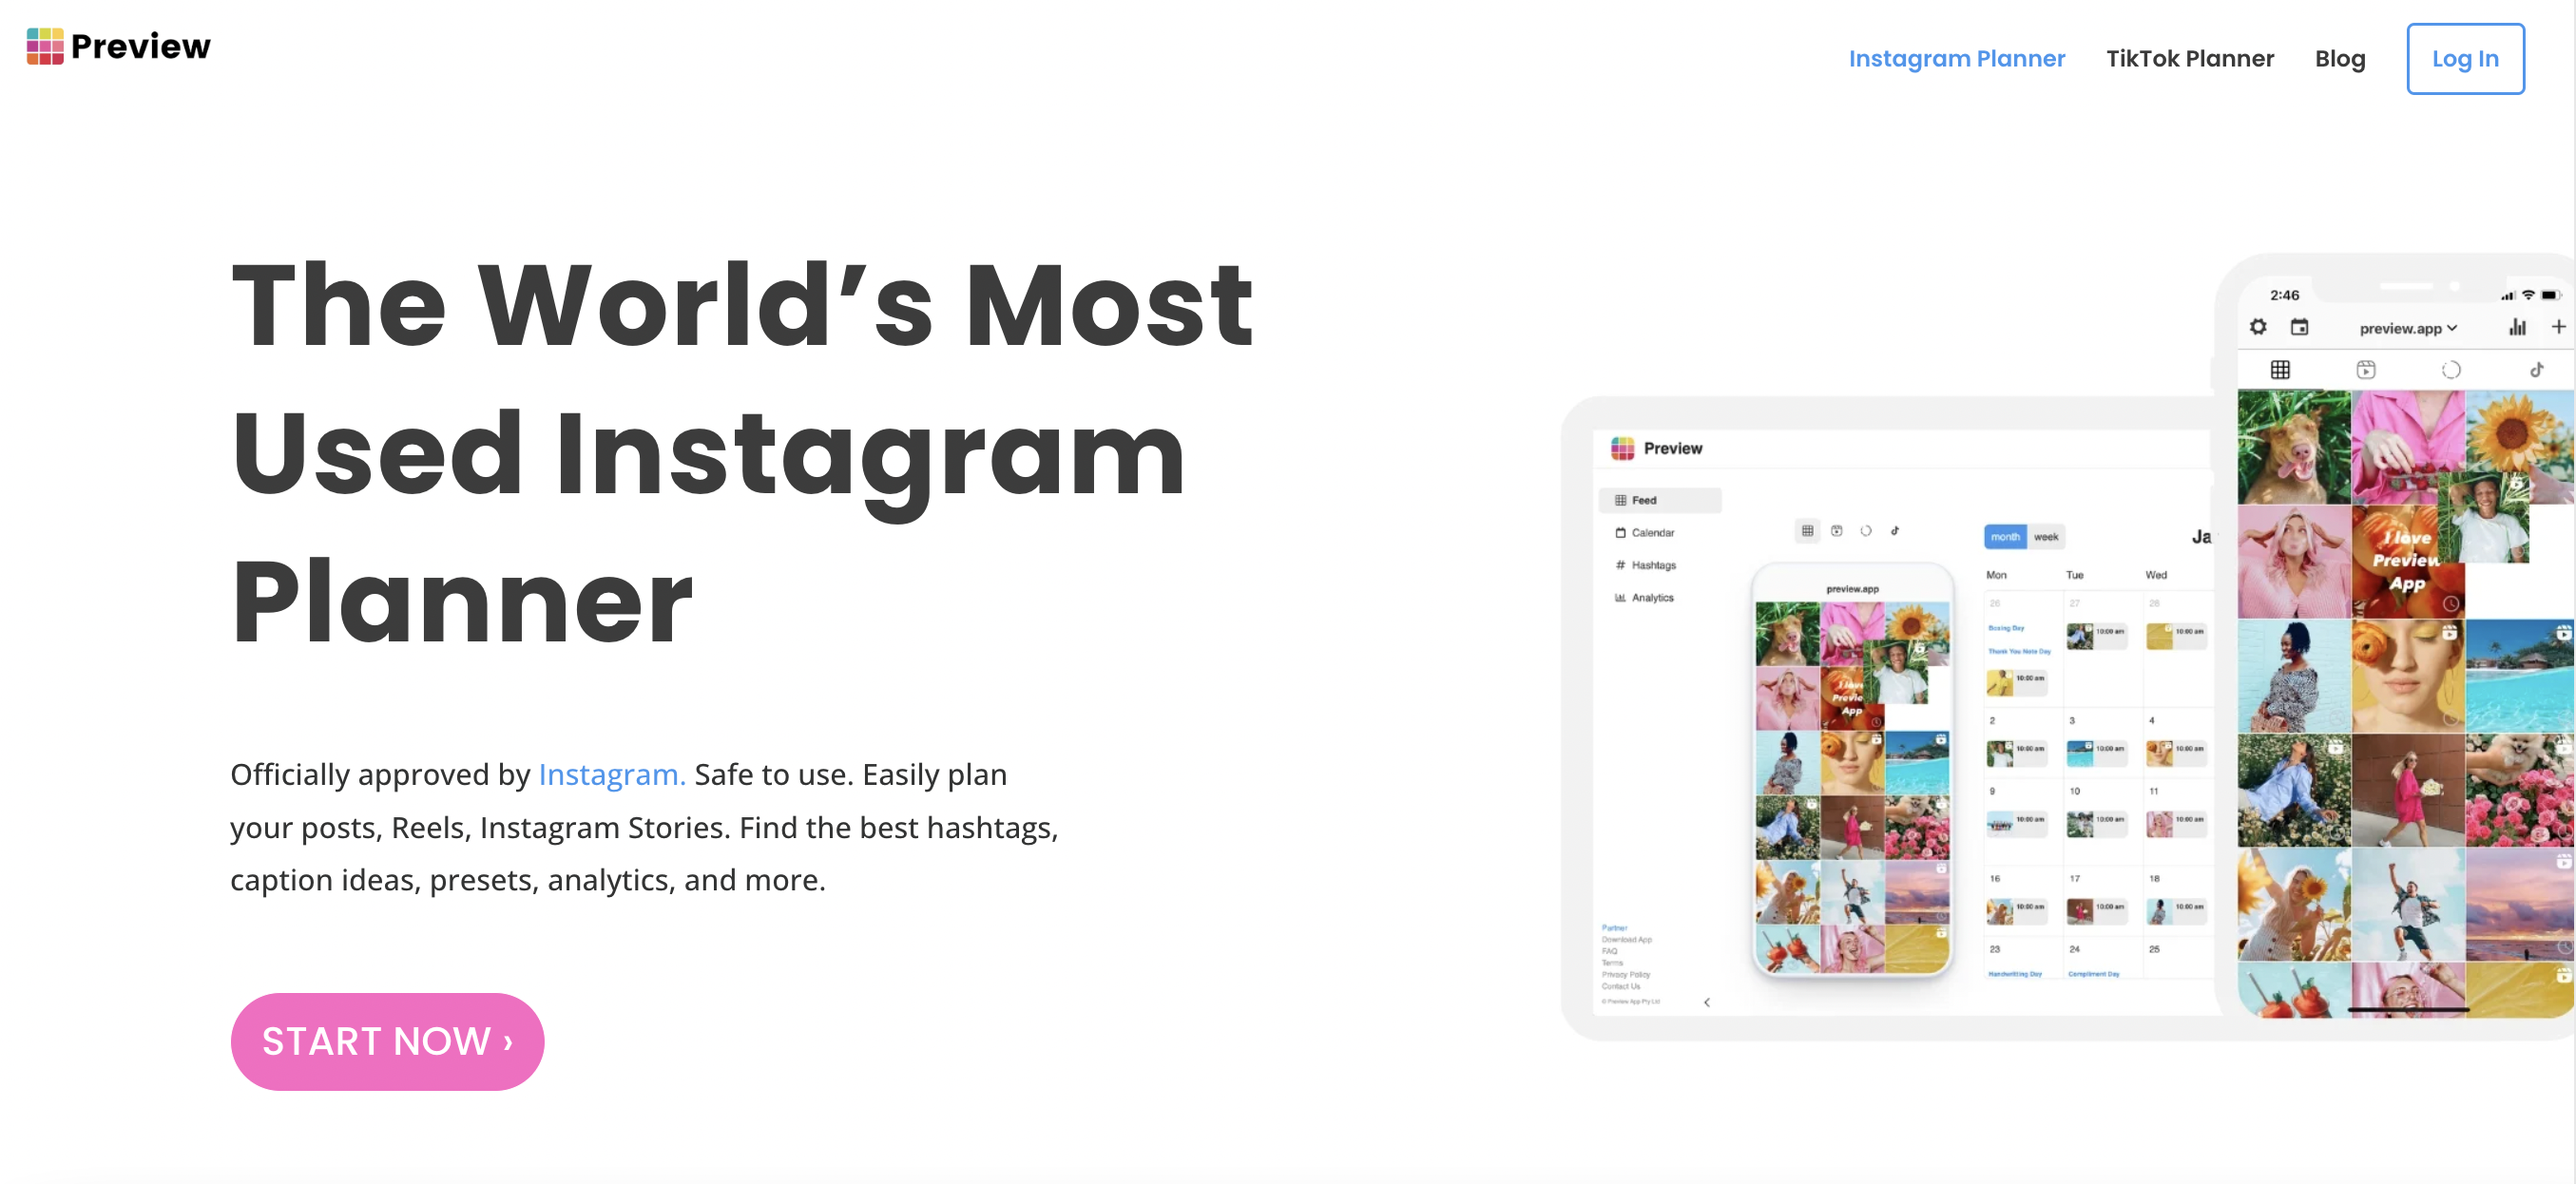 Preview homepage with a preview of the calendar and text that reads "the world's most used Instagram planner"